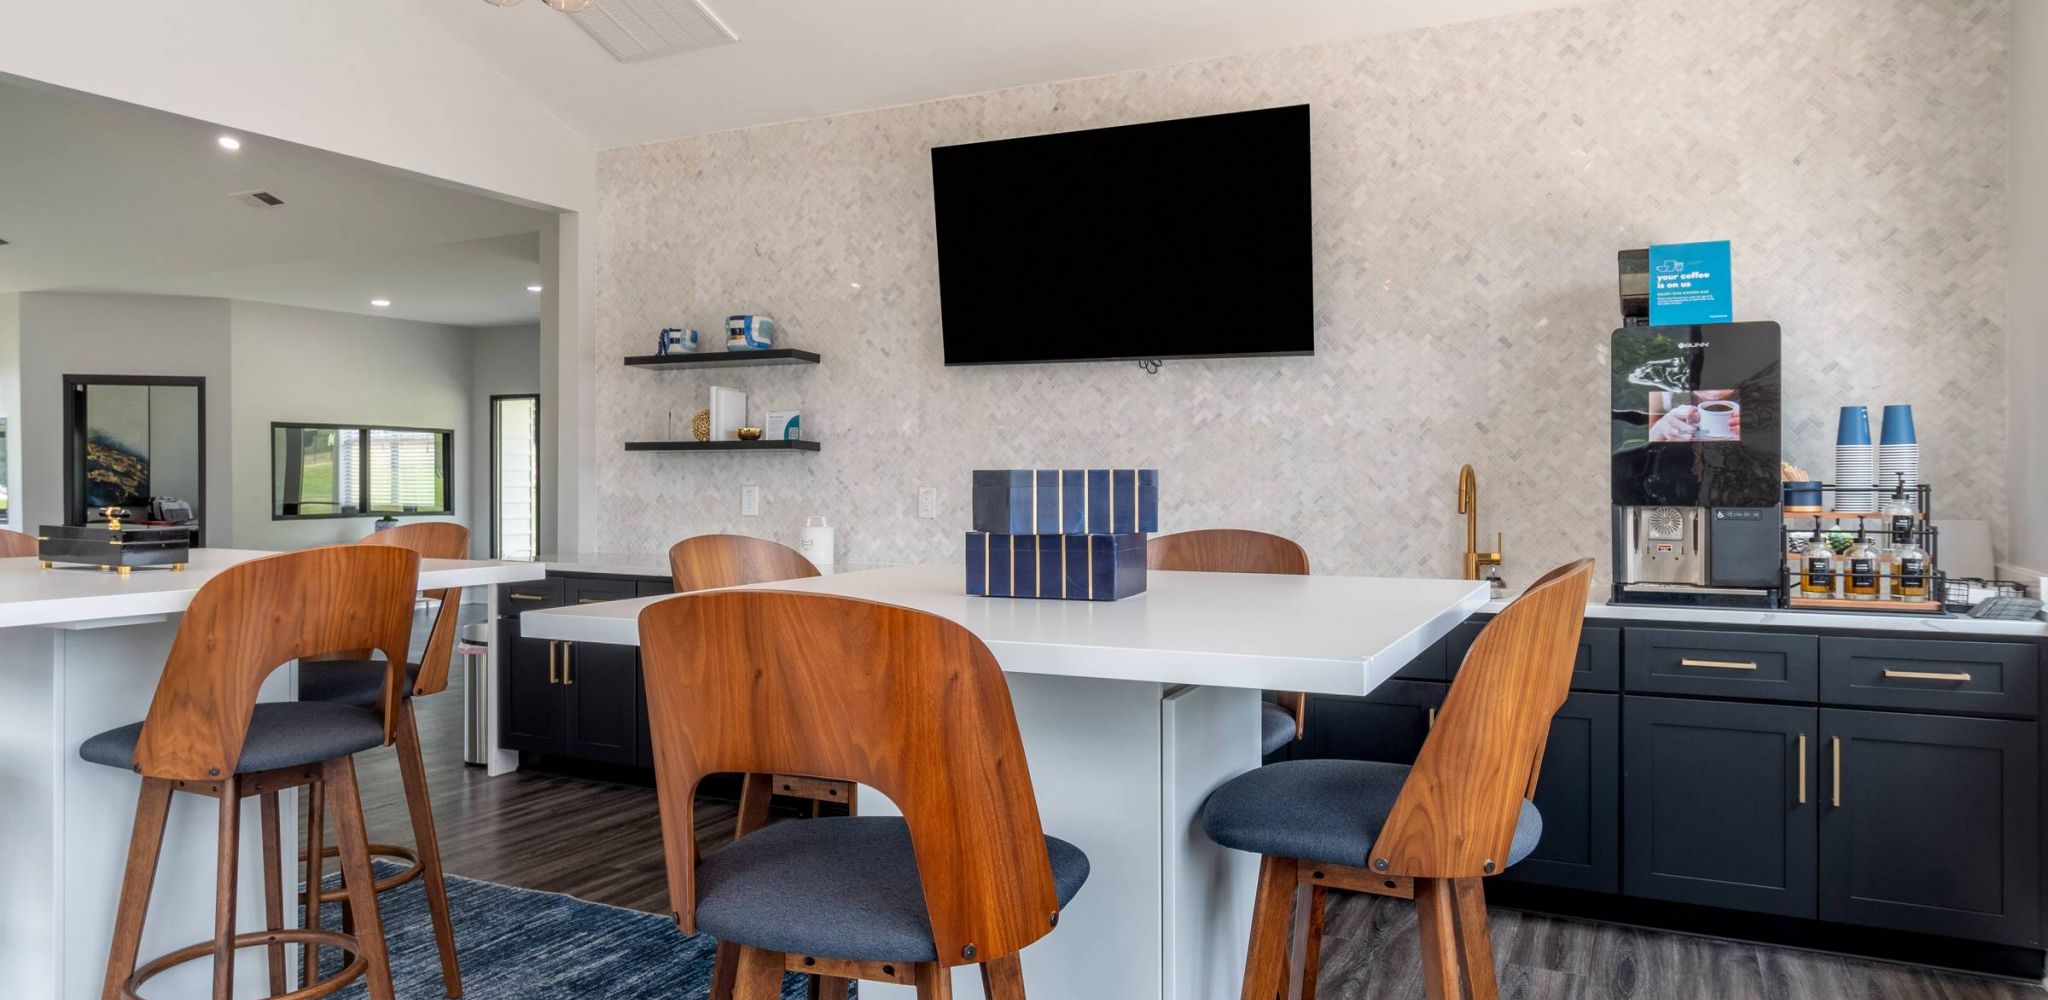 Hawthorne at the Pines resident clubhouse area with bar style seating and a flatscreen tv